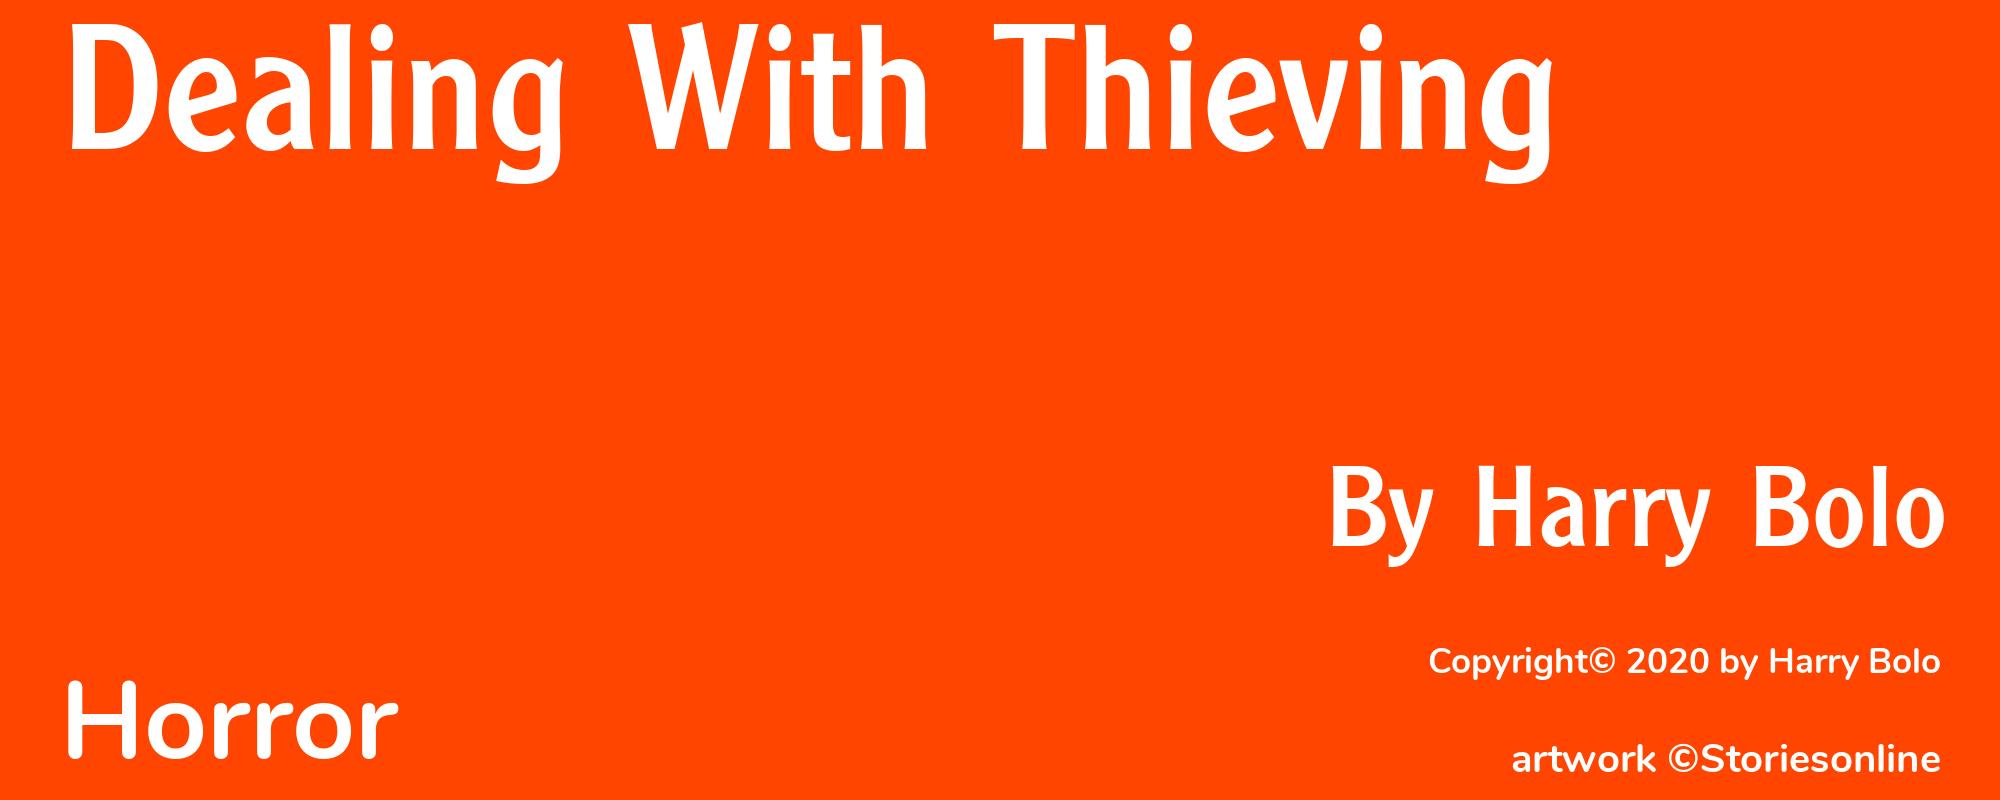 Dealing With Thieving - Cover